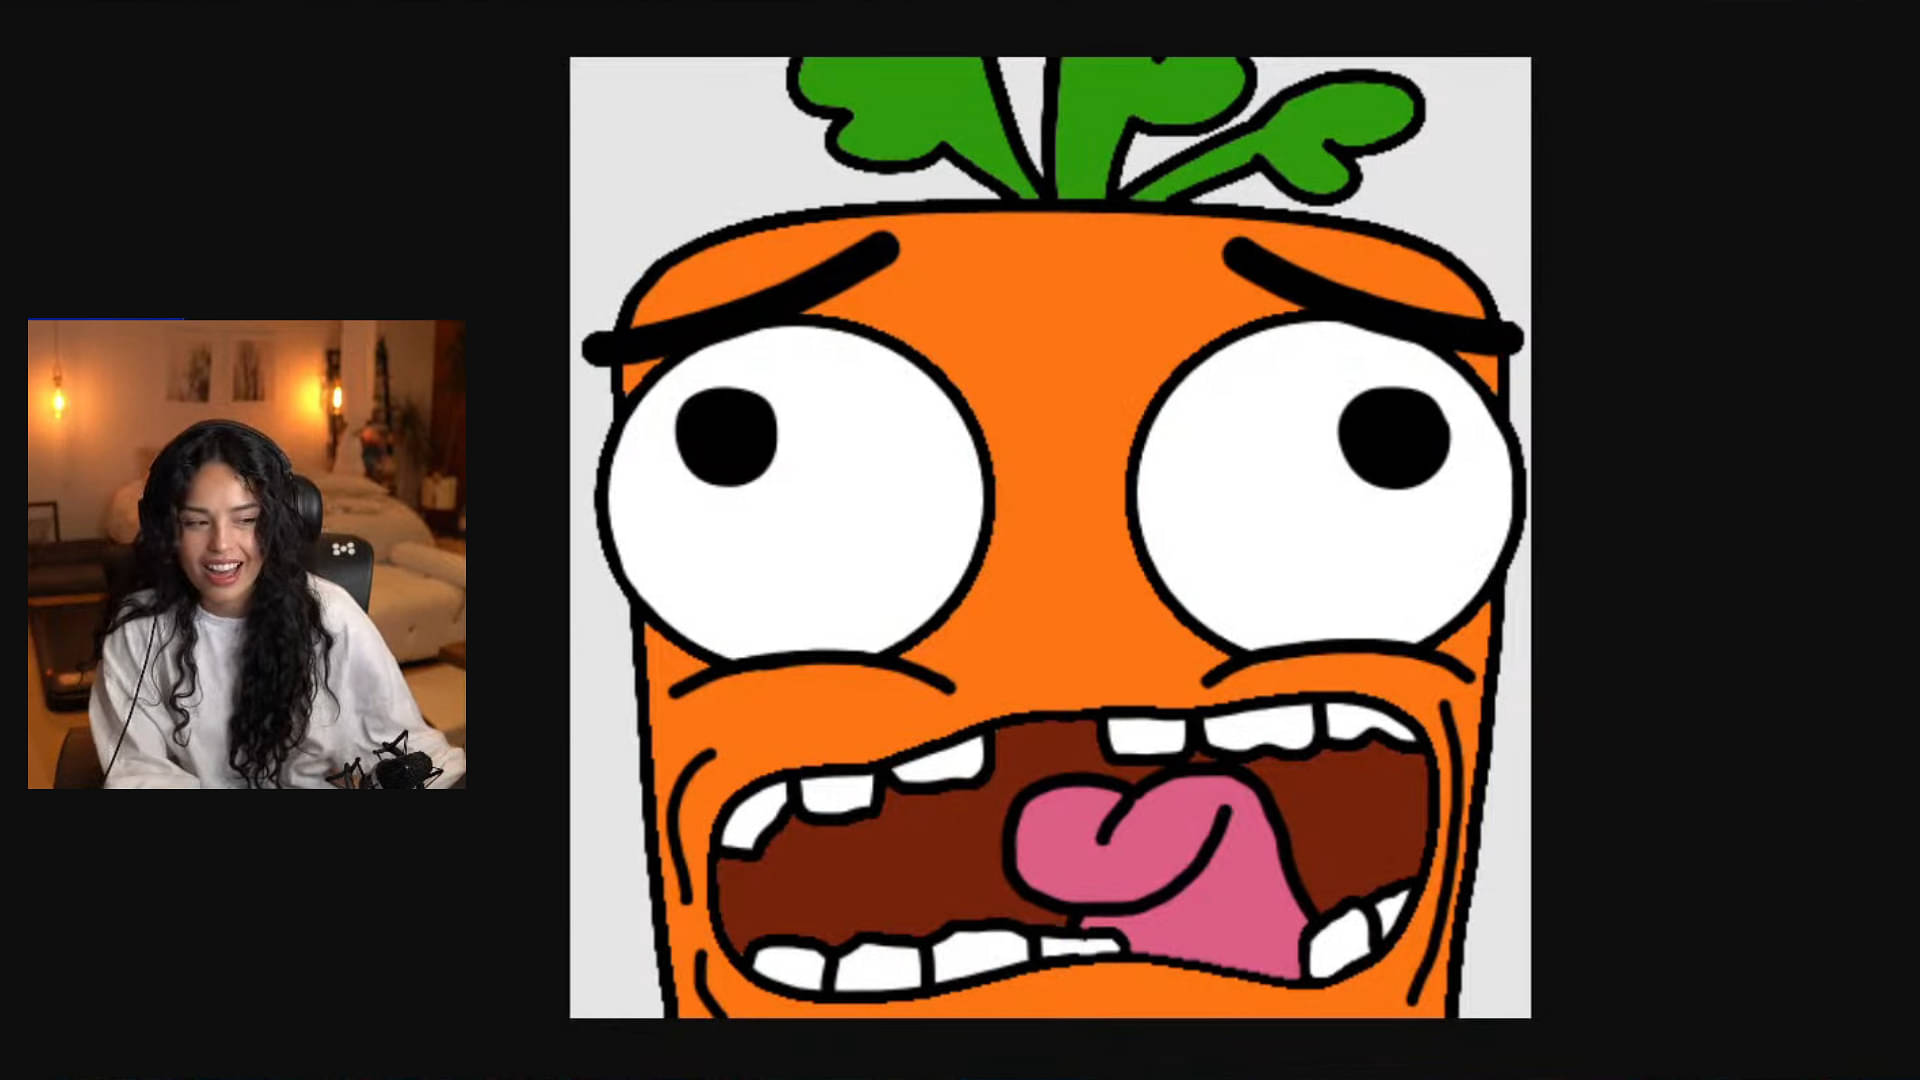 Valkyrae reacts to carrot emote